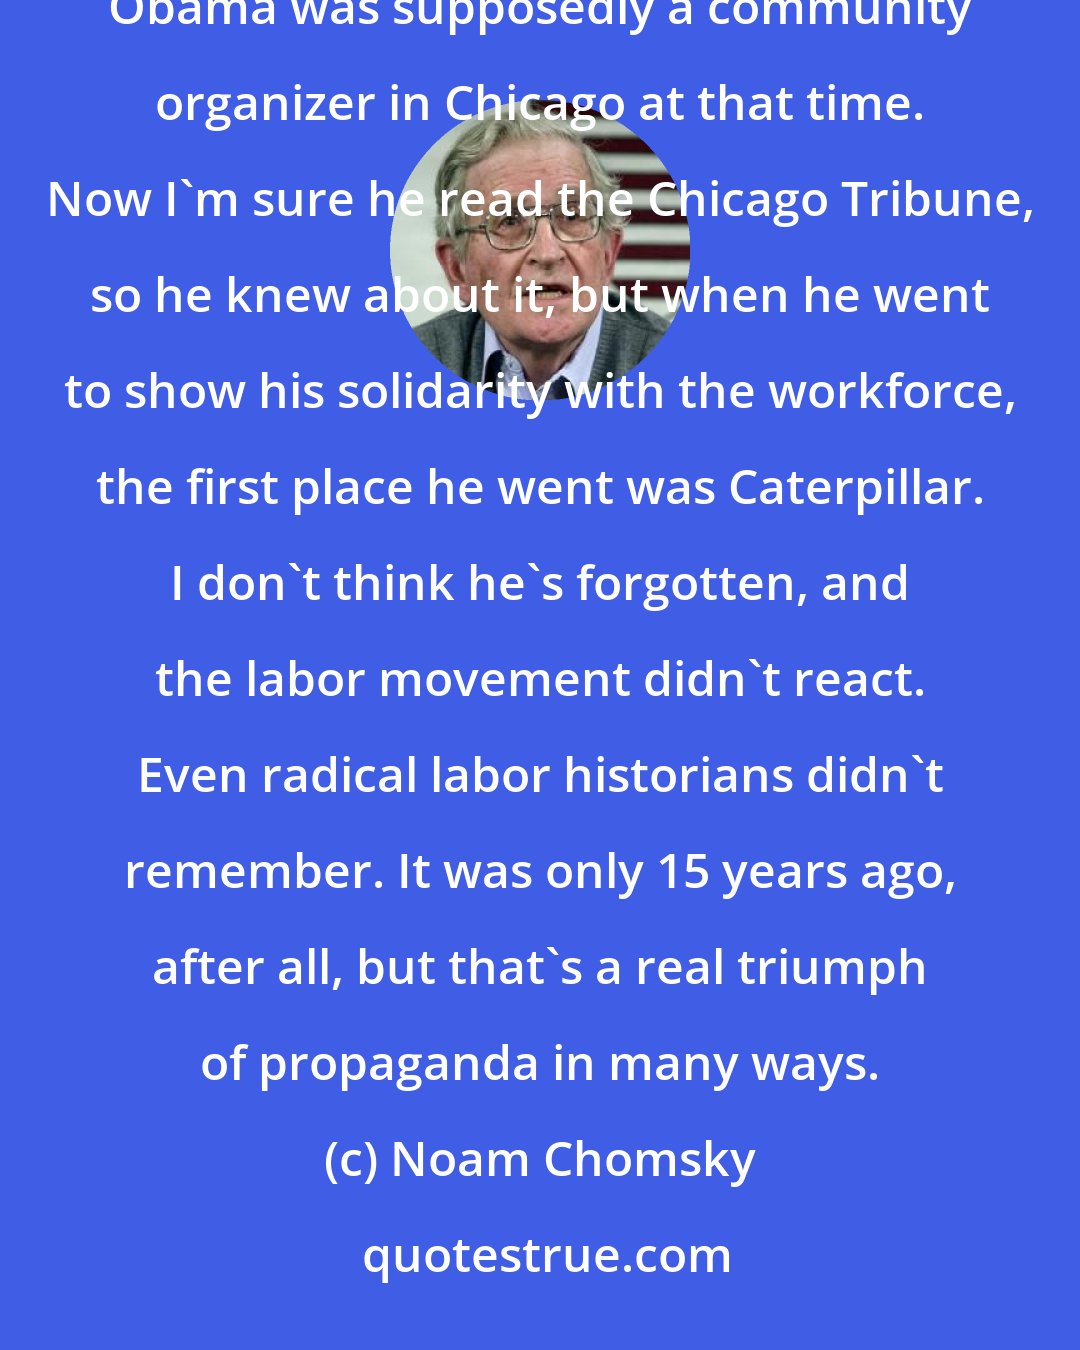 Noam Chomsky: The community itself didn't support the union. Now that's kind of interesting about [Barack] Obama, because Obama was supposedly a community organizer in Chicago at that time. Now I'm sure he read the Chicago Tribune, so he knew about it, but when he went to show his solidarity with the workforce, the first place he went was Caterpillar. I don't think he's forgotten, and the labor movement didn't react. Even radical labor historians didn't remember. It was only 15 years ago, after all, but that's a real triumph of propaganda in many ways.